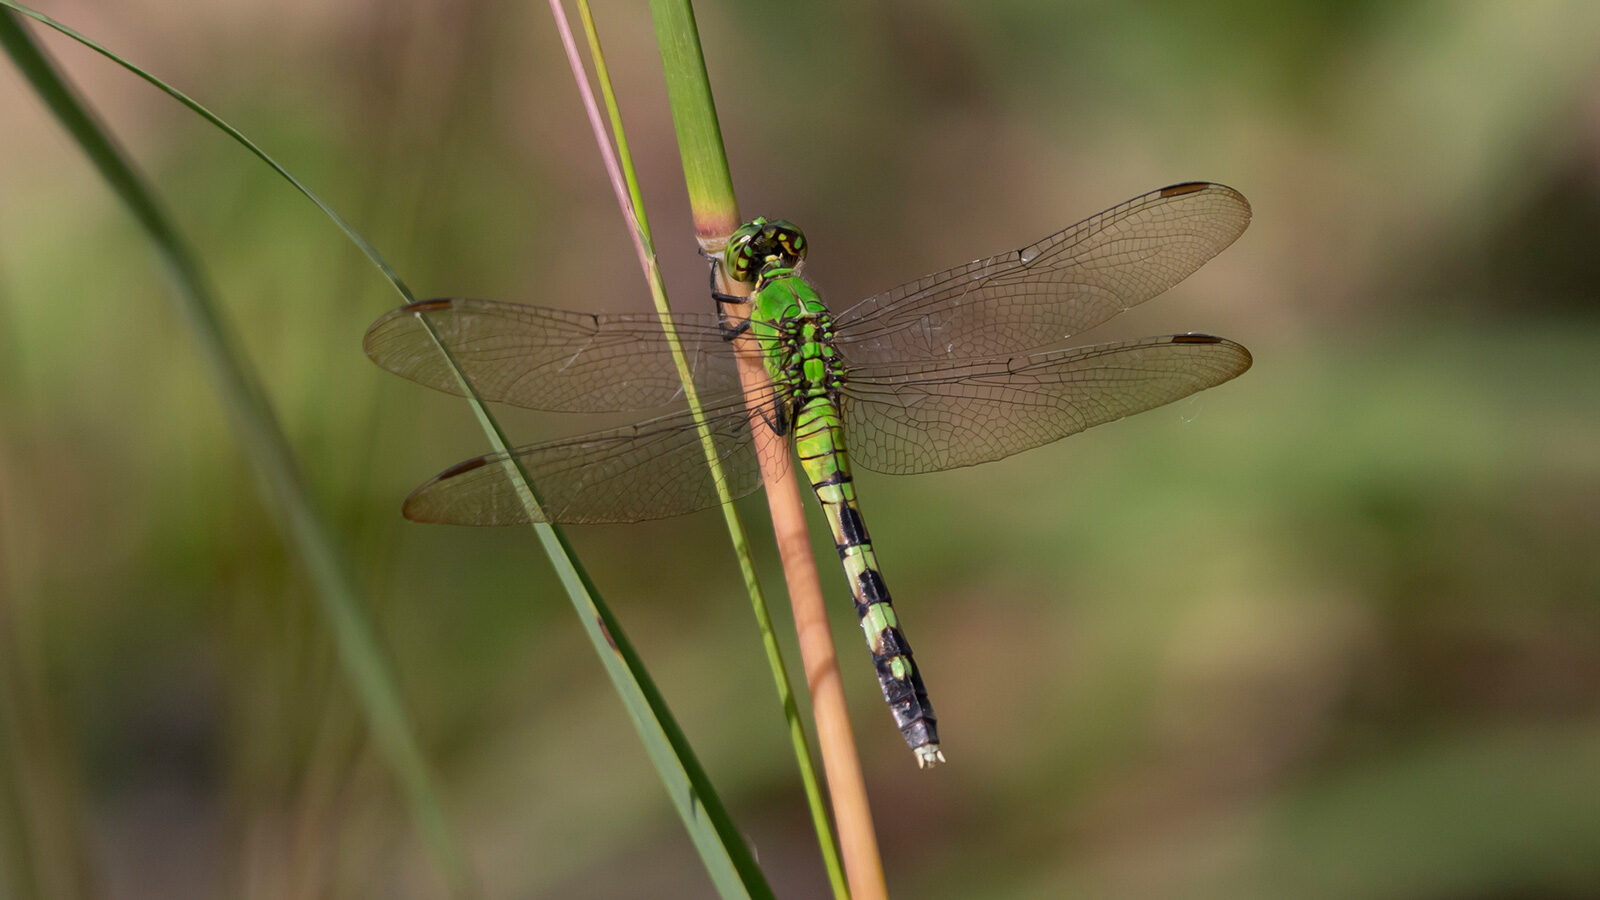 Female eastern pondhawk standing on a blade of grass